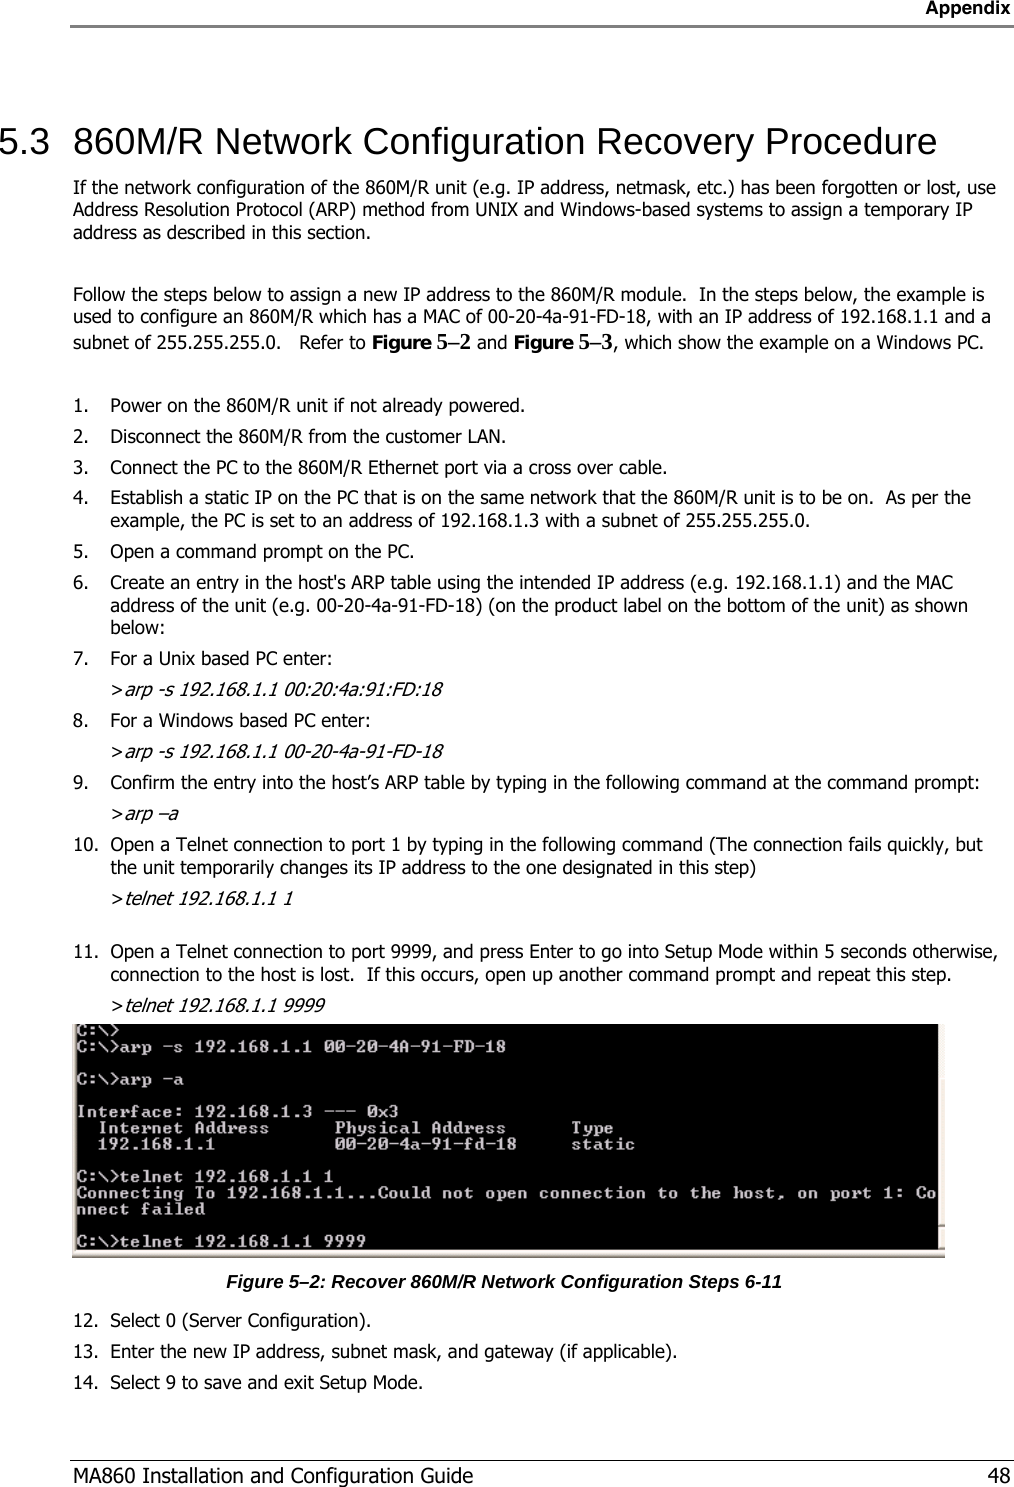 Appendix  MA860 Installation and Configuration Guide   48  5.3  860M/R Network Configuration Recovery Procedure If the network configuration of the 860M/R unit (e.g. IP address, netmask, etc.) has been forgotten or lost, use Address Resolution Protocol (ARP) method from UNIX and Windows-based systems to assign a temporary IP address as described in this section.  Follow the steps below to assign a new IP address to the 860M/R module.  In the steps below, the example is used to configure an 860M/R which has a MAC of 00-20-4a-91-FD-18, with an IP address of 192.168.1.1 and a subnet of 255.255.255.0.   Refer to Figure  5–2 and Figure  5–3, which show the example on a Windows PC.  1. Power on the 860M/R unit if not already powered. 2. Disconnect the 860M/R from the customer LAN. 3. Connect the PC to the 860M/R Ethernet port via a cross over cable. 4. Establish a static IP on the PC that is on the same network that the 860M/R unit is to be on.  As per the example, the PC is set to an address of 192.168.1.3 with a subnet of 255.255.255.0. 5. Open a command prompt on the PC. 6. Create an entry in the host&apos;s ARP table using the intended IP address (e.g. 192.168.1.1) and the MAC address of the unit (e.g. 00-20-4a-91-FD-18) (on the product label on the bottom of the unit) as shown below: 7. For a Unix based PC enter: &gt;arp -s 192.168.1.1 00:20:4a:91:FD:18  8. For a Windows based PC enter: &gt;arp -s 192.168.1.1 00-20-4a-91-FD-18 9. Confirm the entry into the host’s ARP table by typing in the following command at the command prompt: &gt;arp –a 10. Open a Telnet connection to port 1 by typing in the following command (The connection fails quickly, but the unit temporarily changes its IP address to the one designated in this step) &gt;telnet 192.168.1.1 1  11. Open a Telnet connection to port 9999, and press Enter to go into Setup Mode within 5 seconds otherwise, connection to the host is lost.  If this occurs, open up another command prompt and repeat this step.  &gt;telnet 192.168.1.1 9999  Figure  5–2: Recover 860M/R Network Configuration Steps 6-11 12. Select 0 (Server Configuration). 13. Enter the new IP address, subnet mask, and gateway (if applicable). 14. Select 9 to save and exit Setup Mode. 